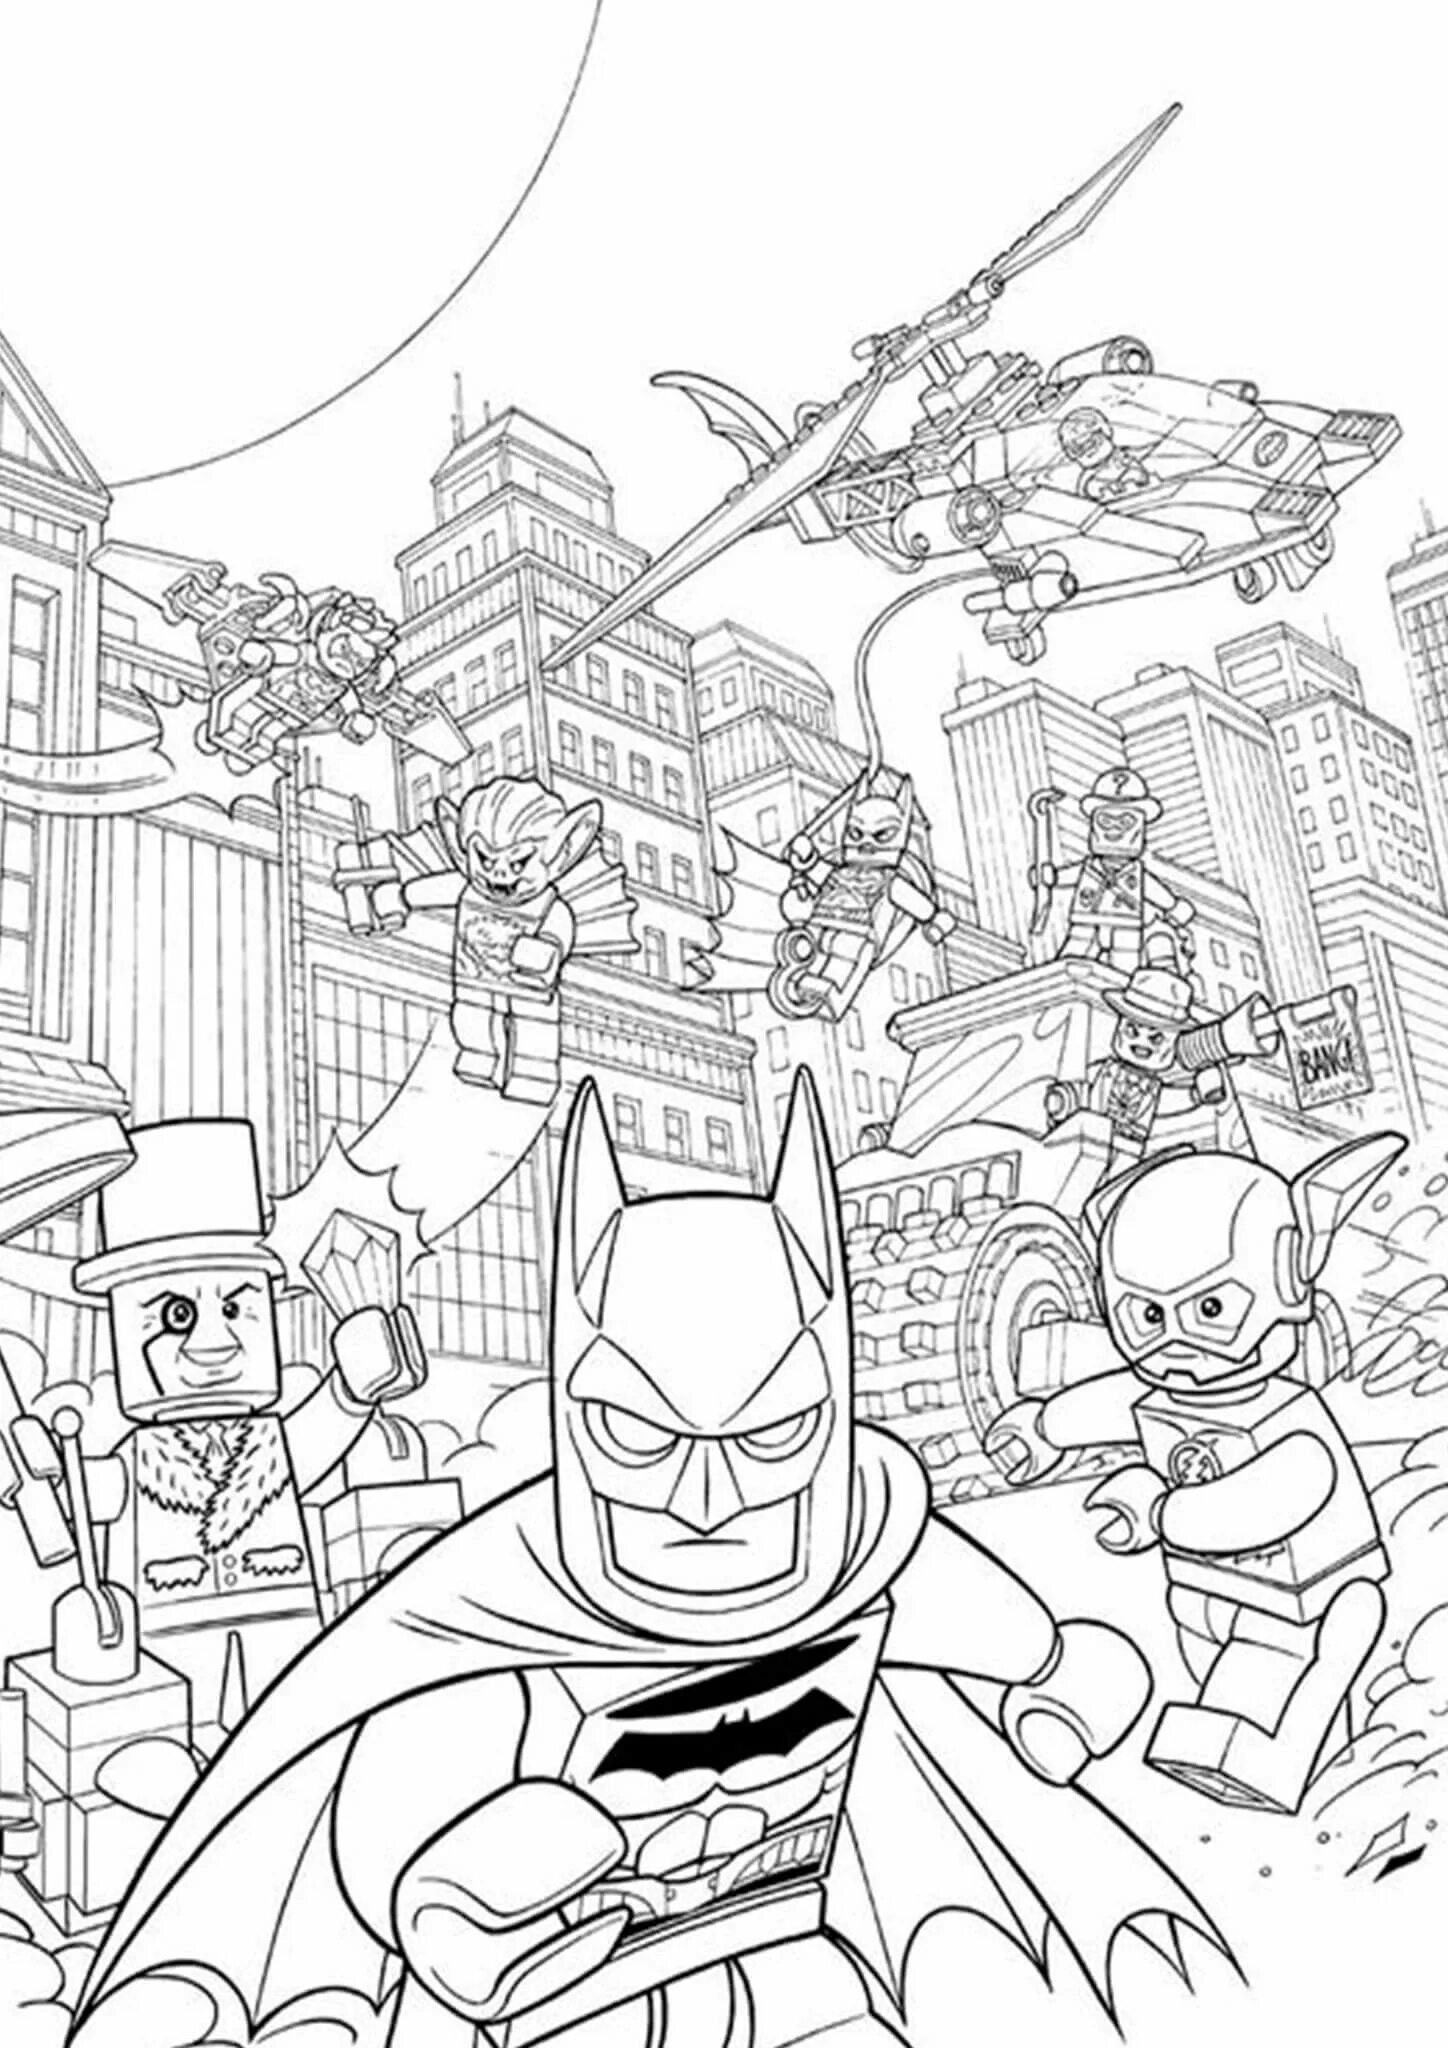 Lego heroes coloring book filled with color